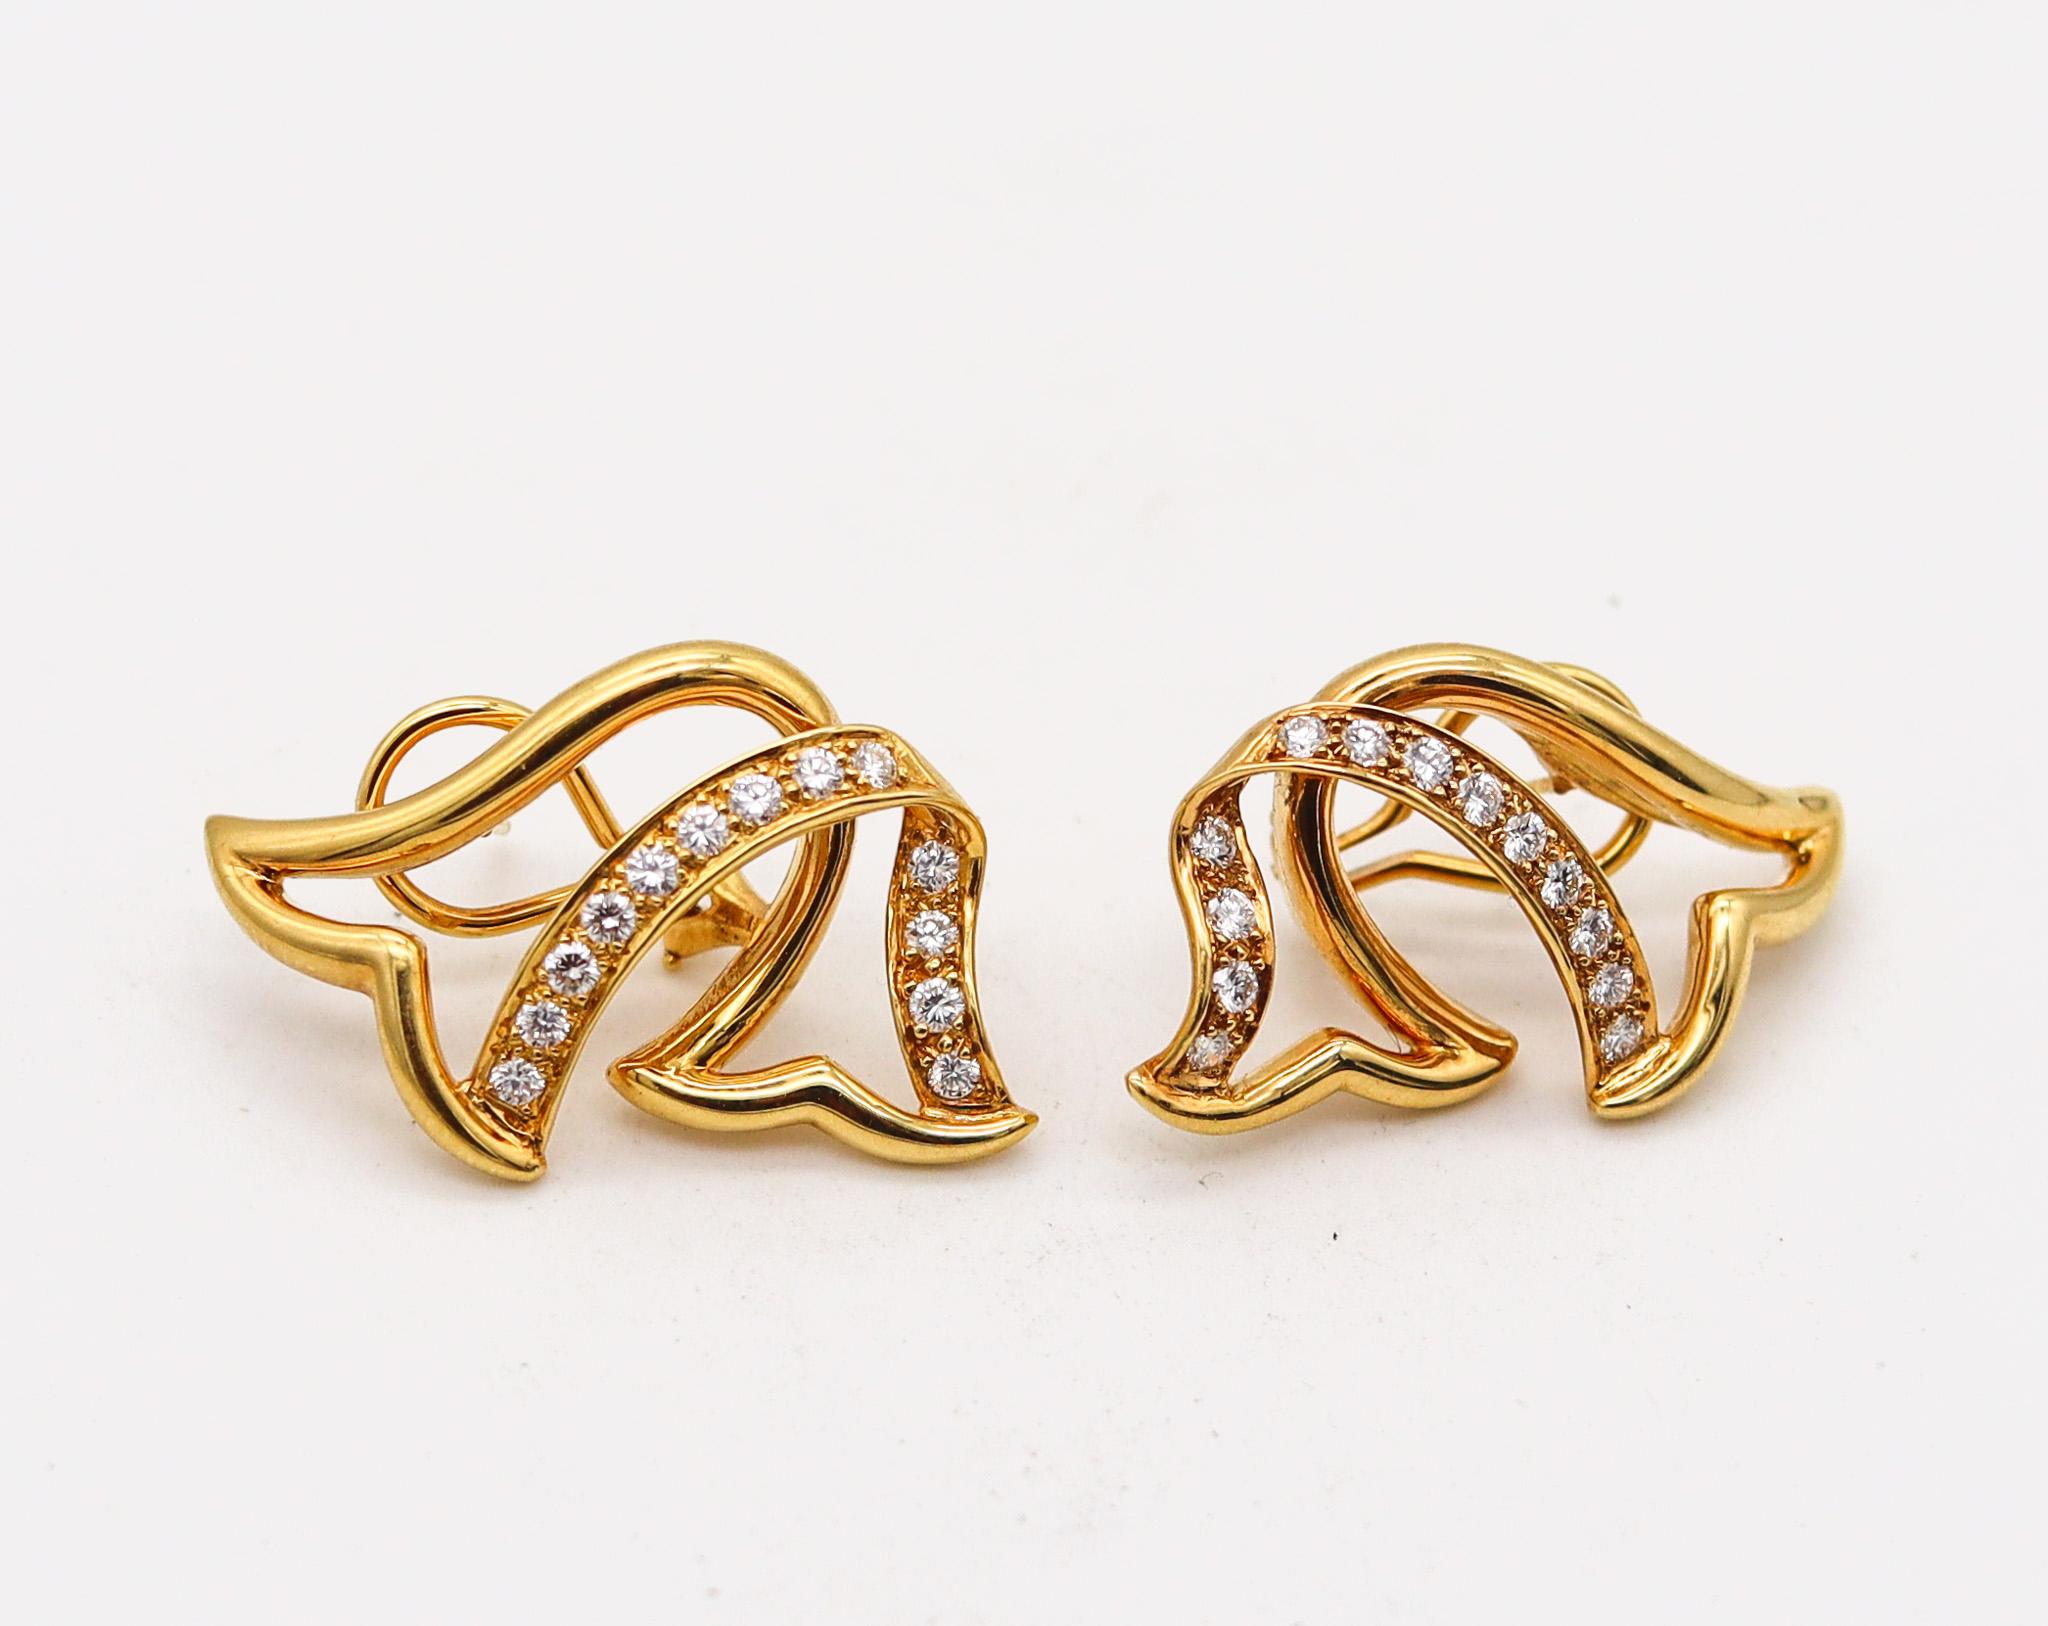 Ear-clips earrings designed by Sonia Bitton.

Fabulous three-dimensional ear clips earrings created in New York city by the American jewelry designer Sonia Bitton. They has been crafted with free forms in solid yellow gold of 18 karats with high